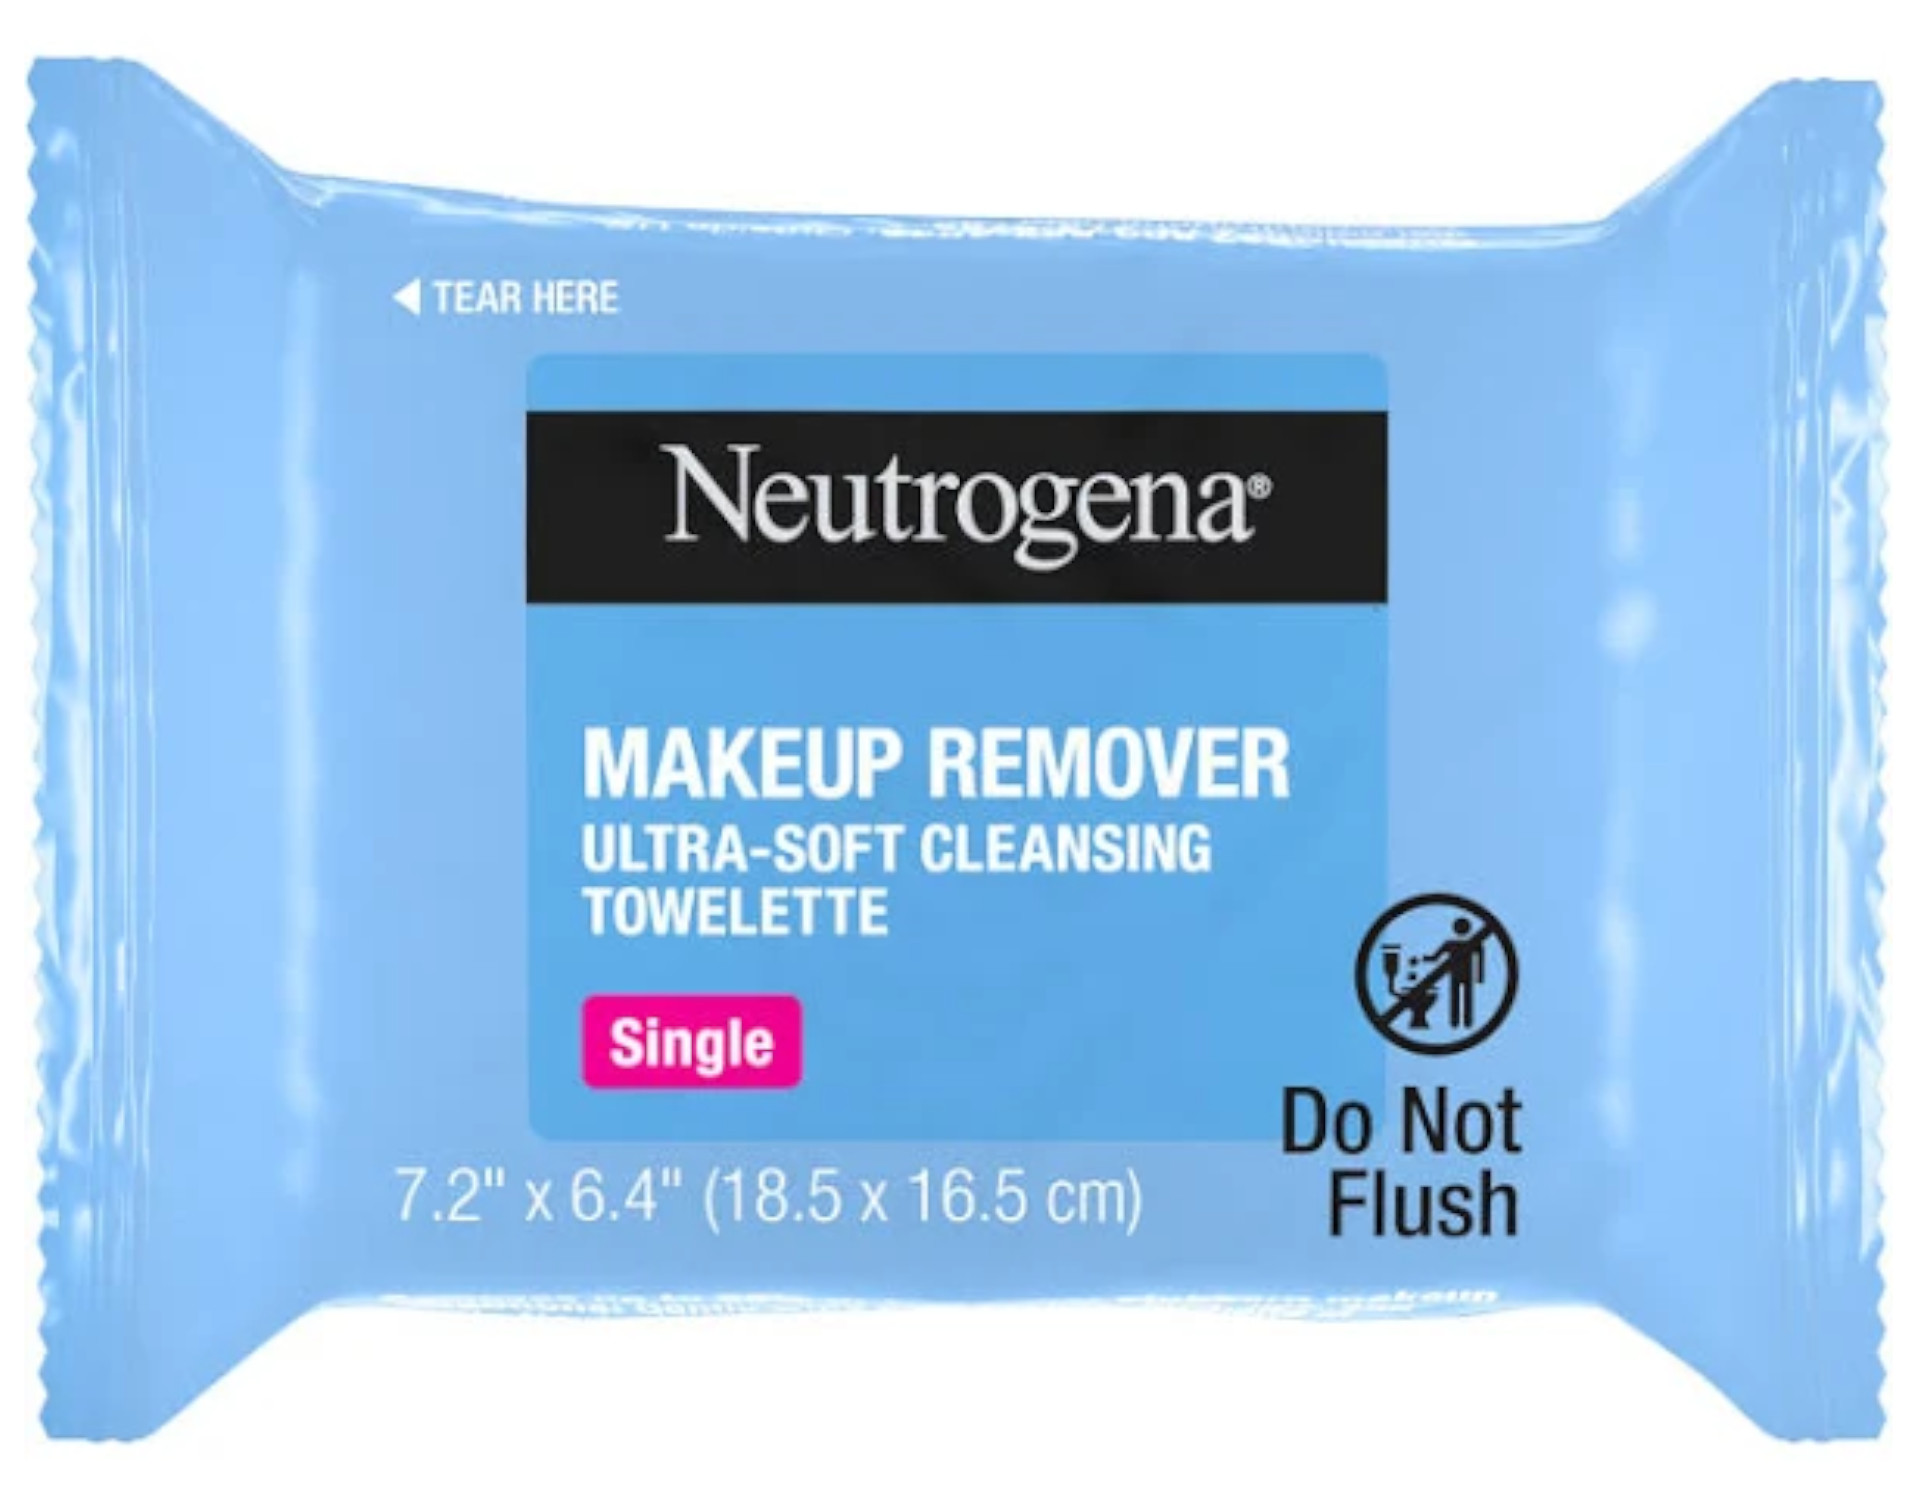 6 Pack Neutrogena Cleansing Facial Wipes, Individually Wrapped, 1 Bag of 20 Each - image 3 of 5